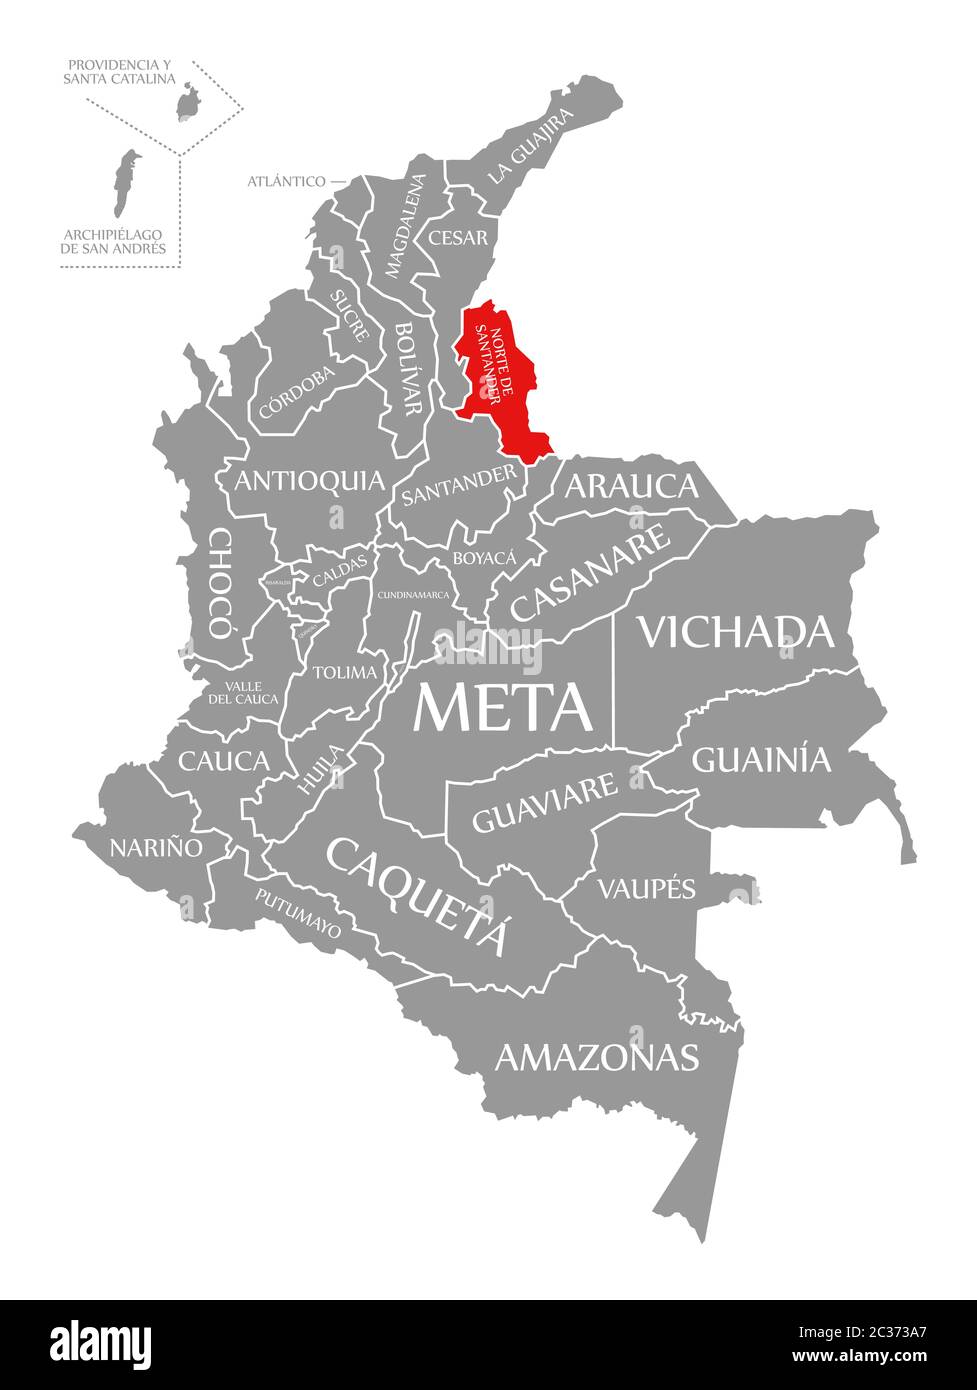 Norte de Santander red highlighted in map of Colombia Stock Photo